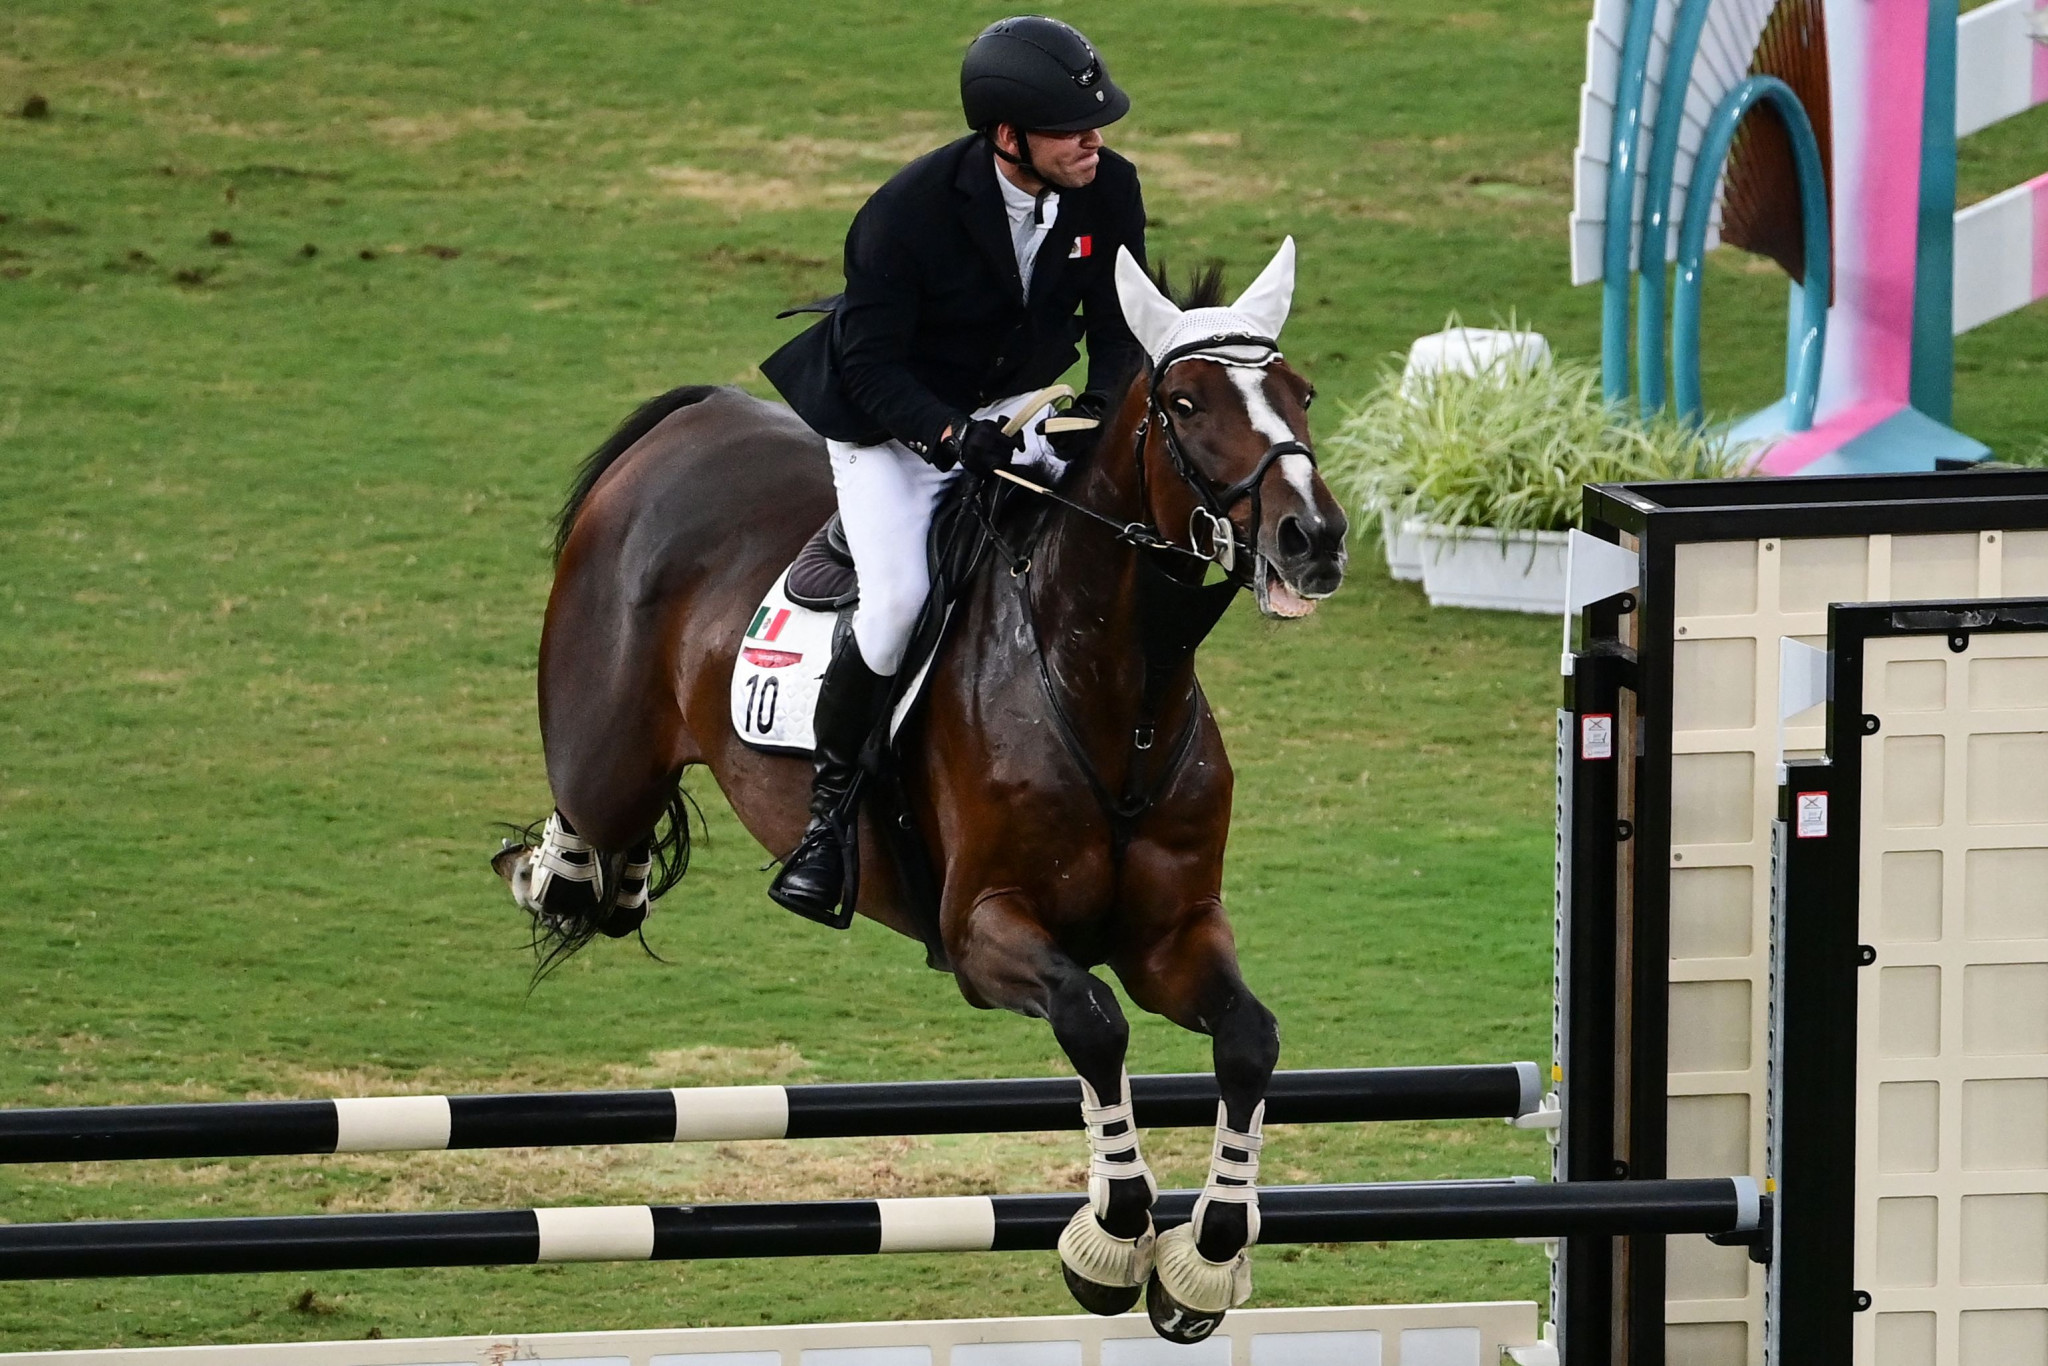 Modern pentathlon was removed from the list of sports in Los Angeles 2028 after concerns over animal abuse ©Getty Images